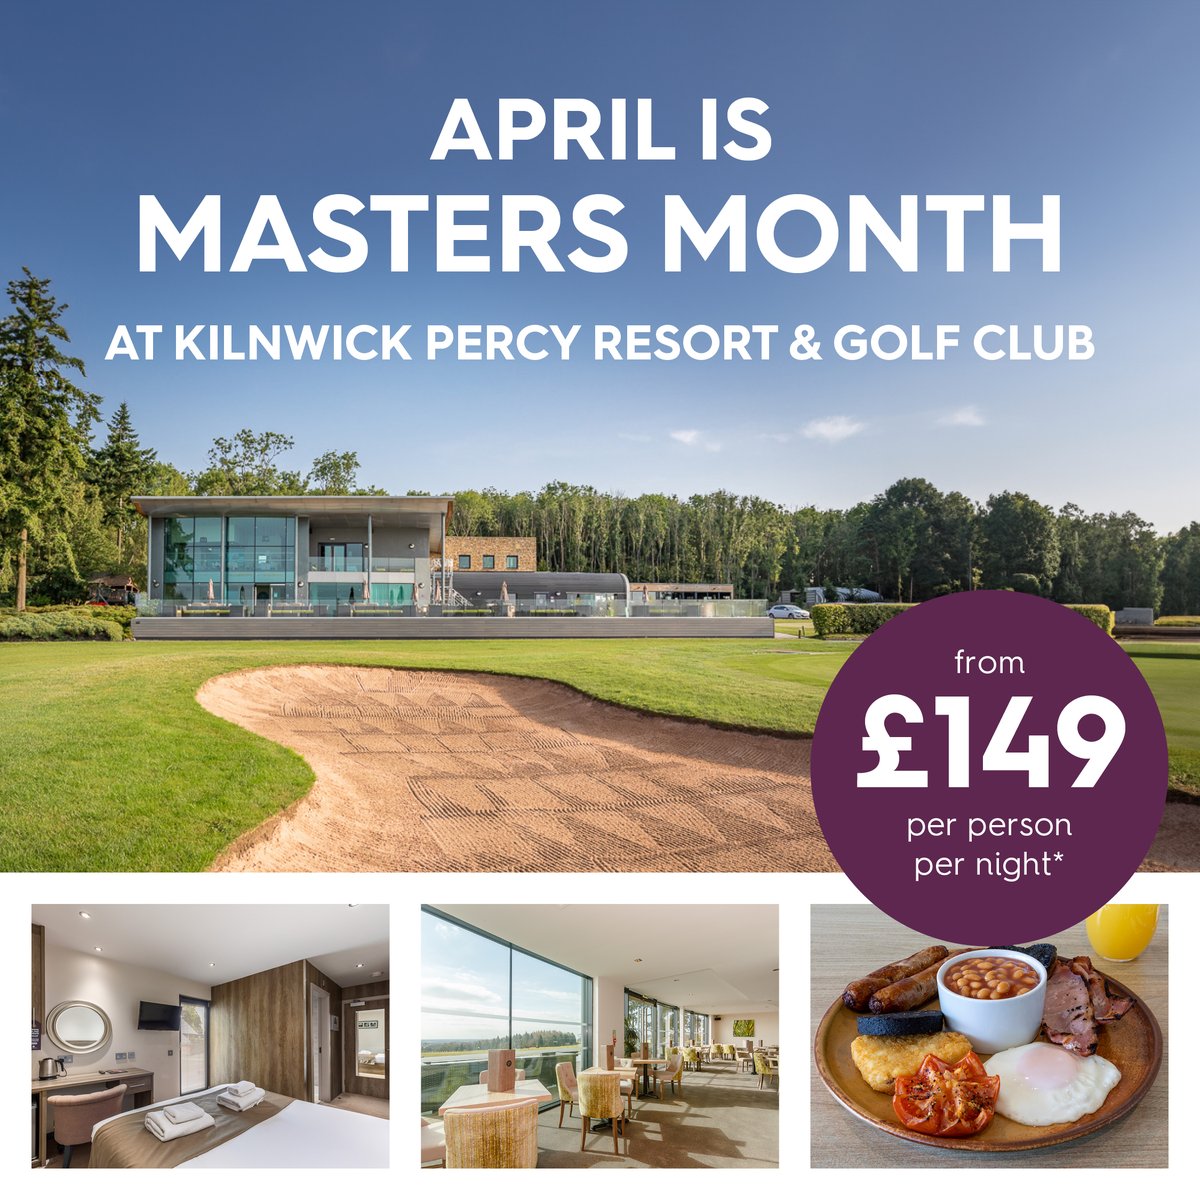 A few short days until the Masters ⛳but there’s still time to book and relax with us. April is Masters Month at Kilnwick Percy: our renowned course and hospitality, a luxury room, and menu inspired by great Masters moments. Find out more and book on 01759 303 090